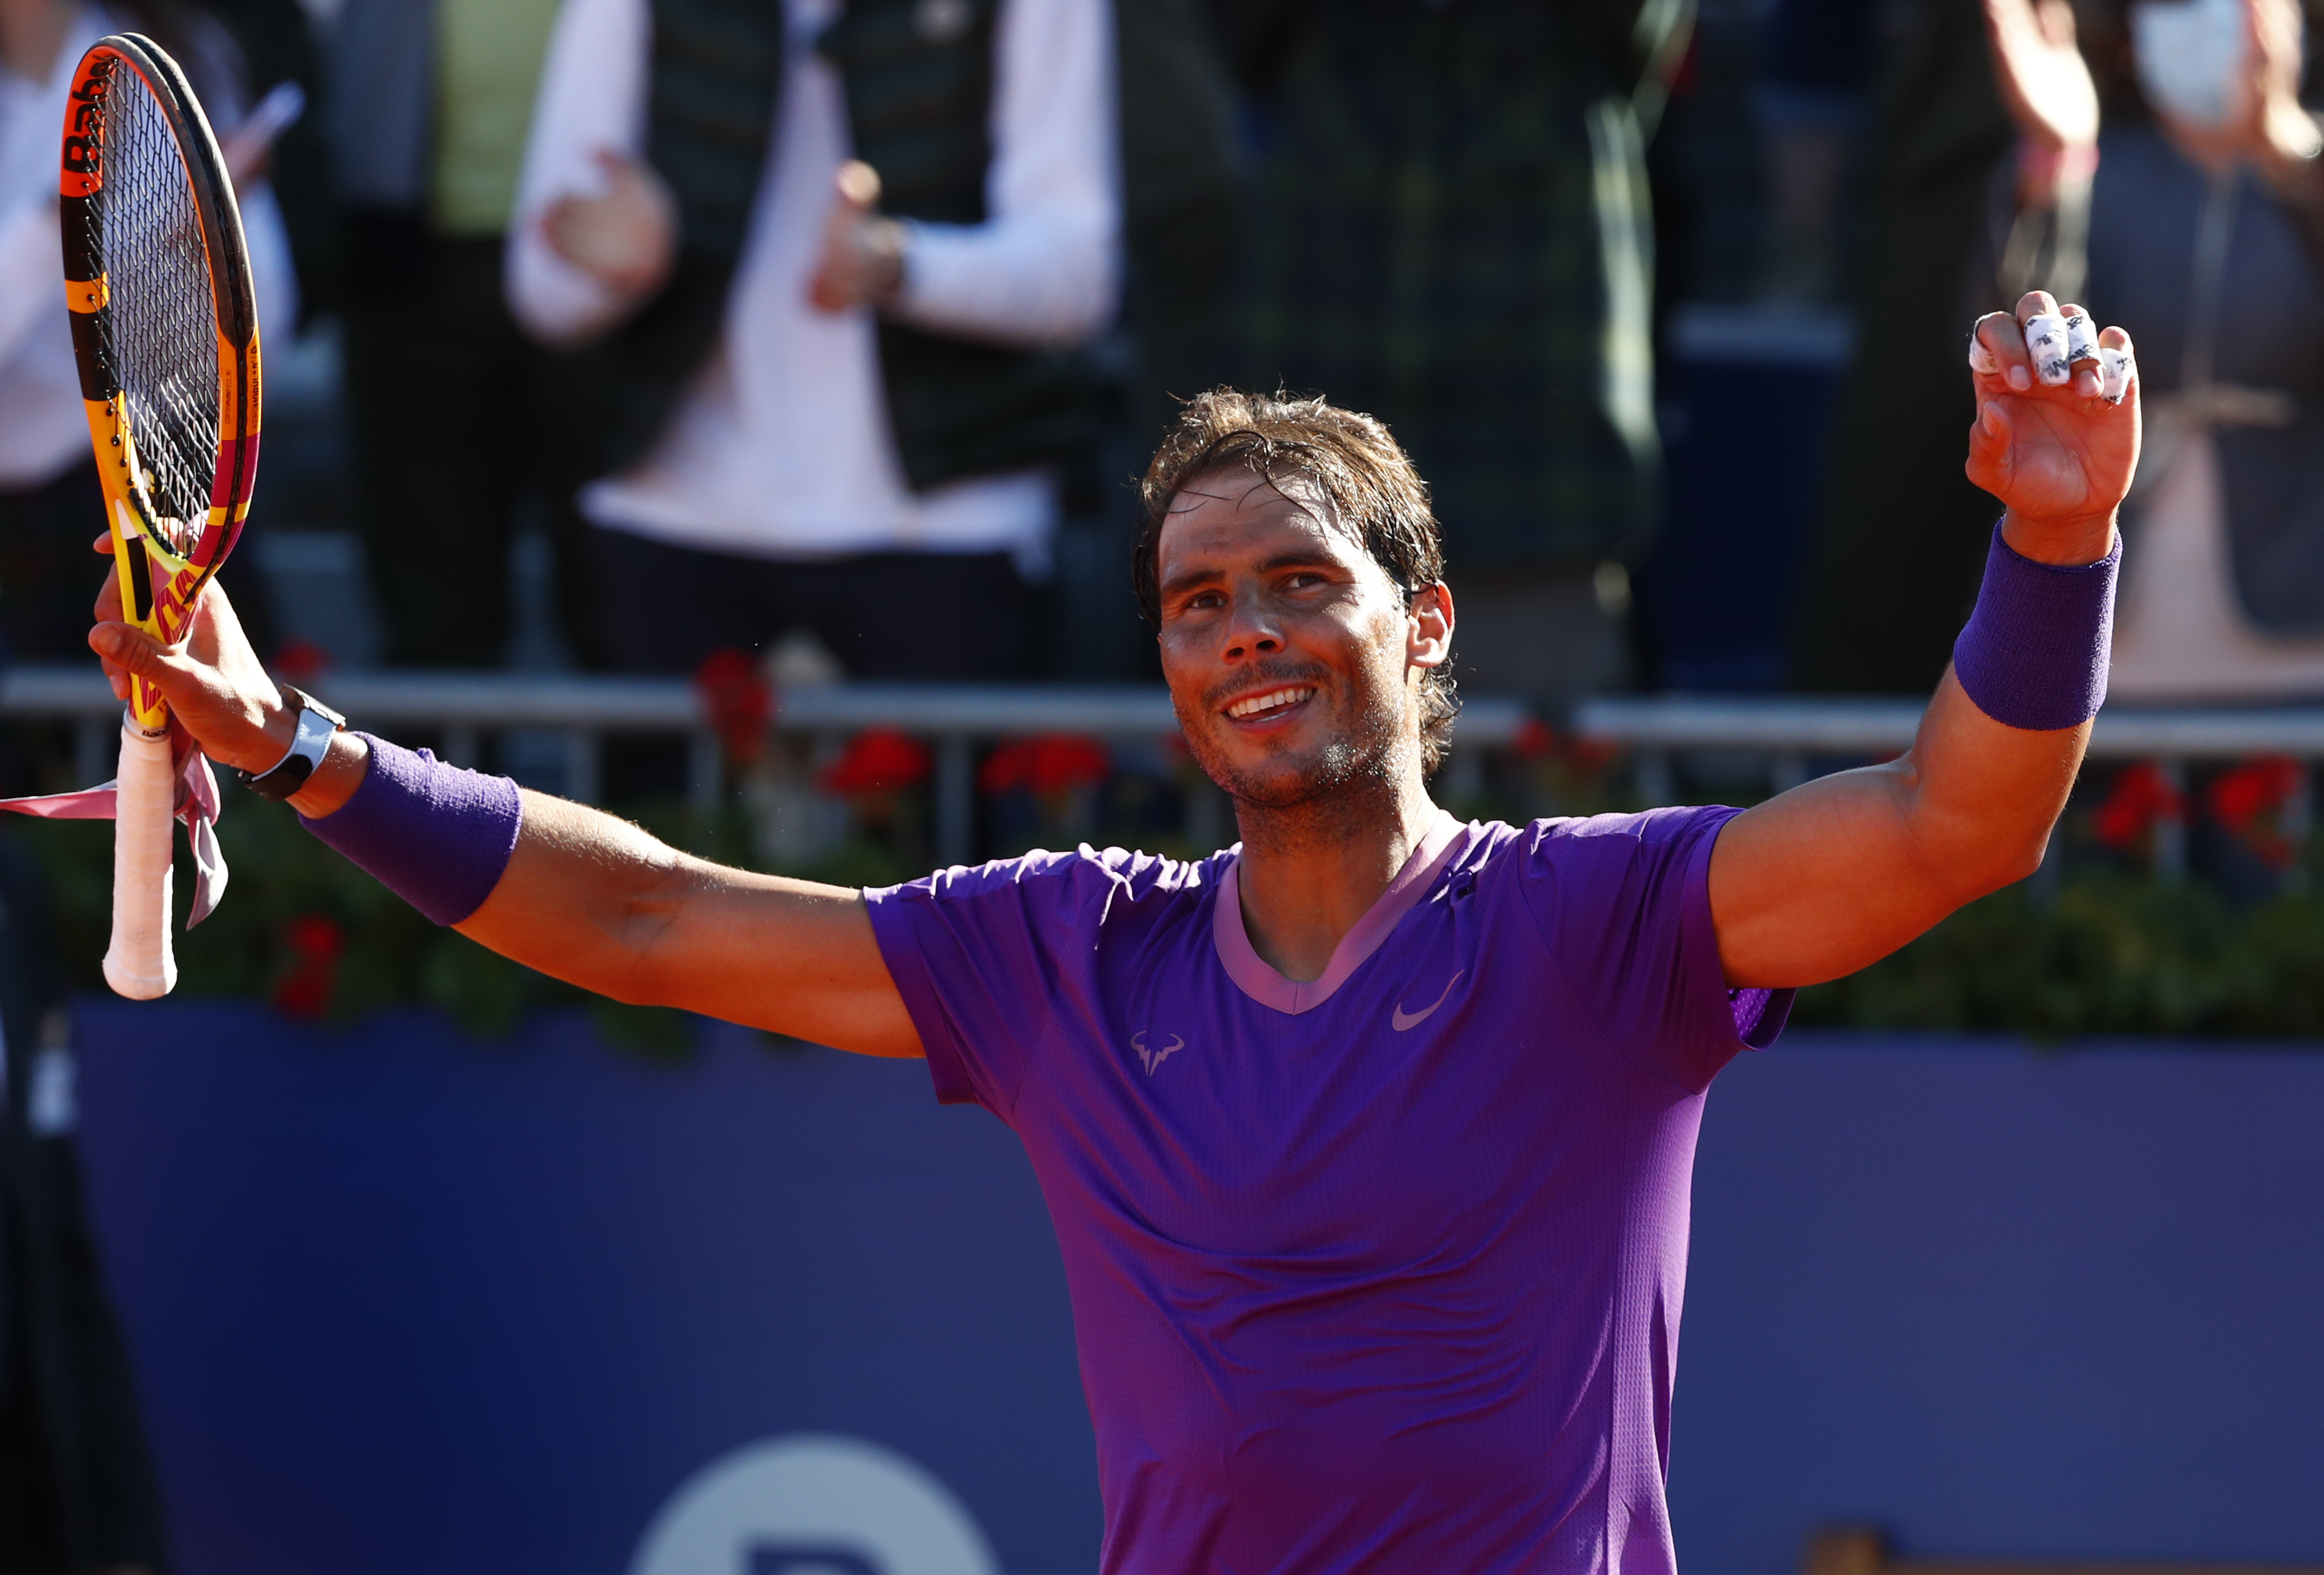 Rafael  lt;HIT gt;Nadal lt;/HIT gt; of Spain celebrates after defeating Cameron Norrie of Britain 6-1, 6-4 during a quarterfinal Godo tennis tournament in Barcelona, Spain, Friday, April 23, 2021. (AP Photo/Joan Monfort)